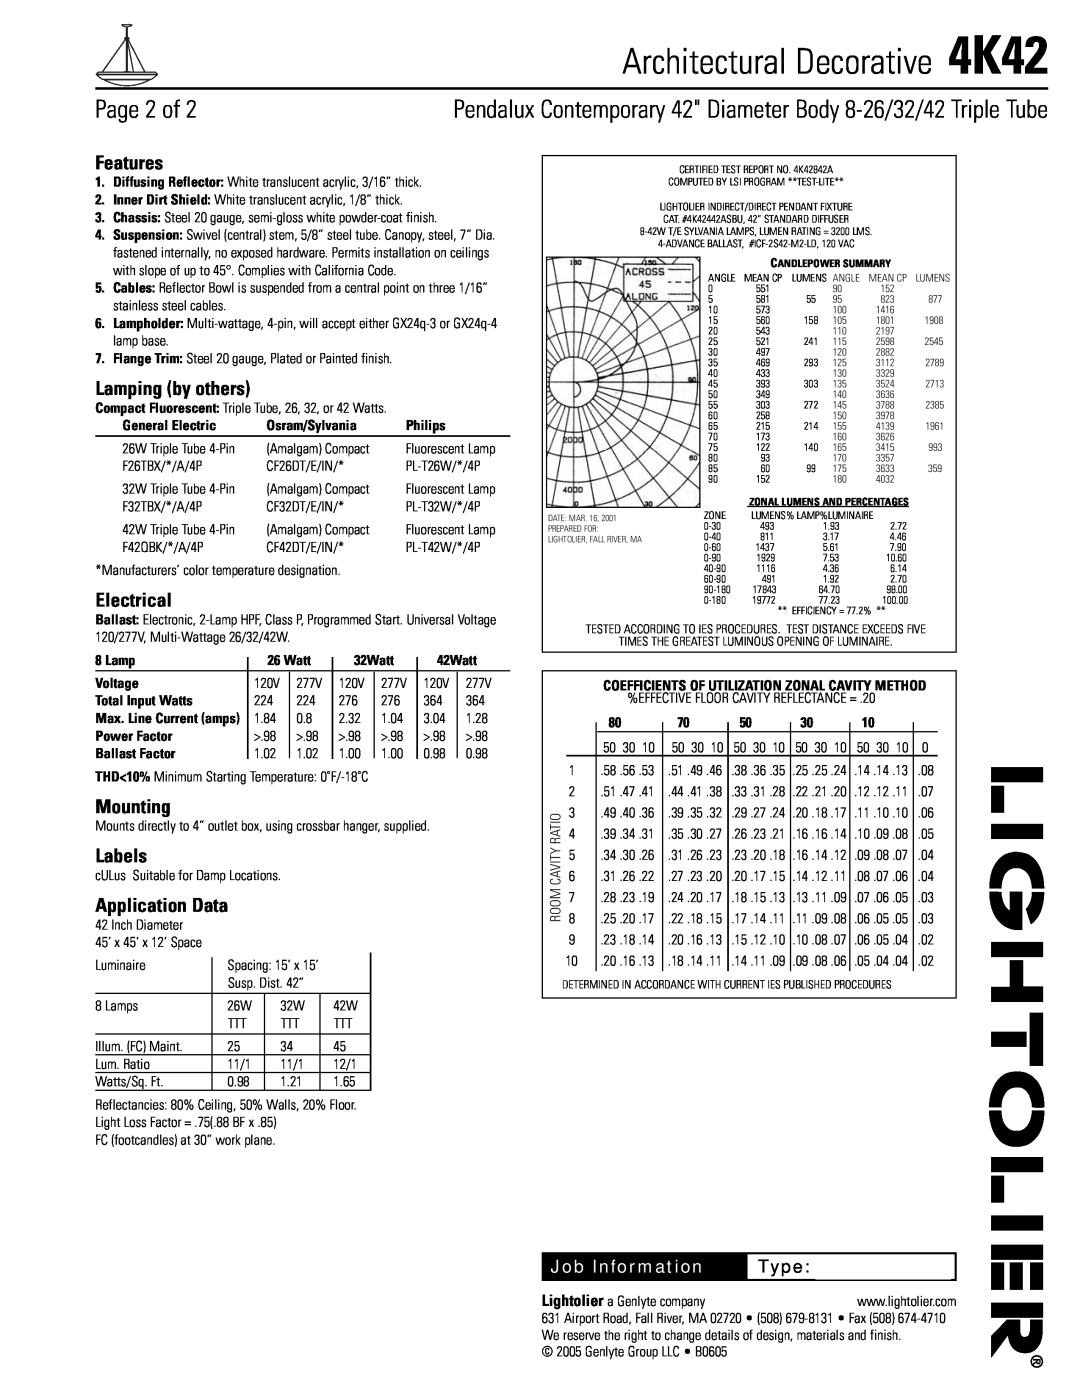 Lightolier 4K42 specifications Page 2 of, Features, Lamping by others, Electrical, Mounting, Labels, Application Data, Type 